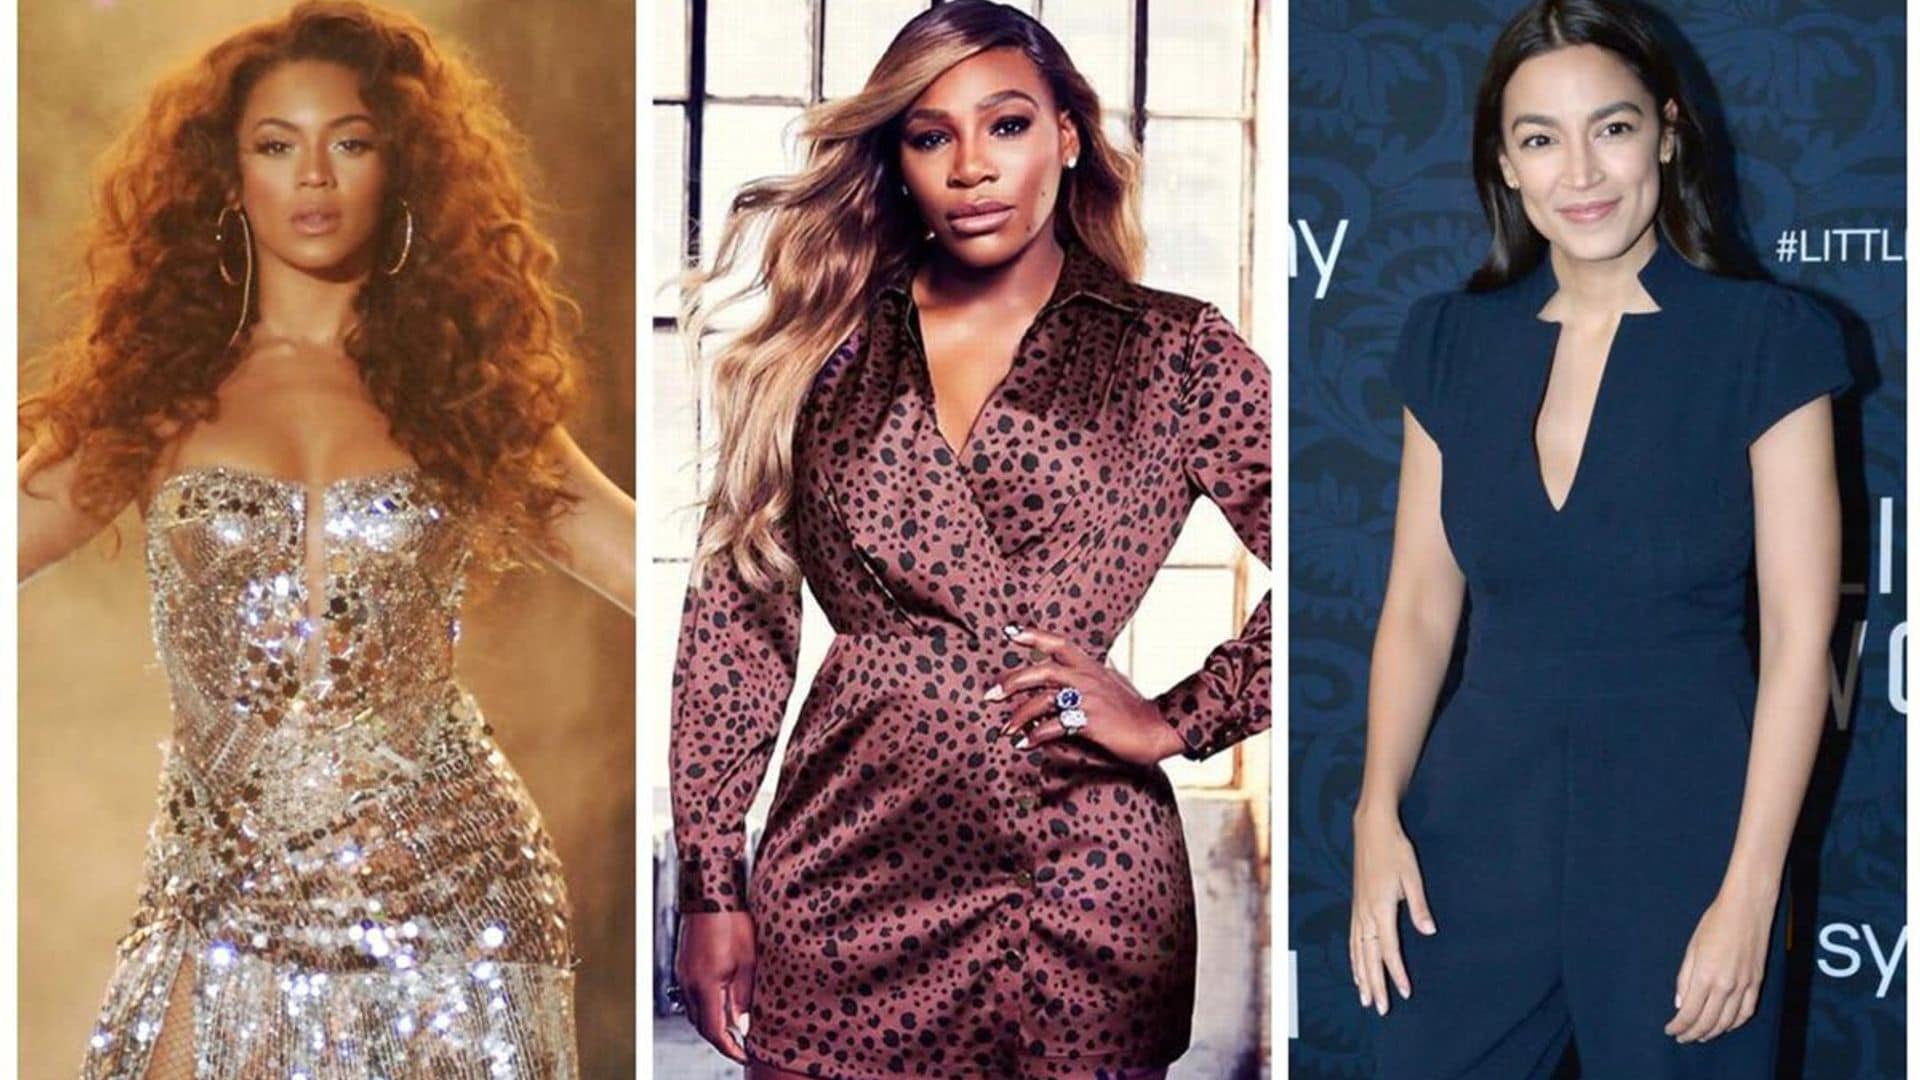 Beyoncé, Serena Williams will be recognized as superheroes in a graphic novel